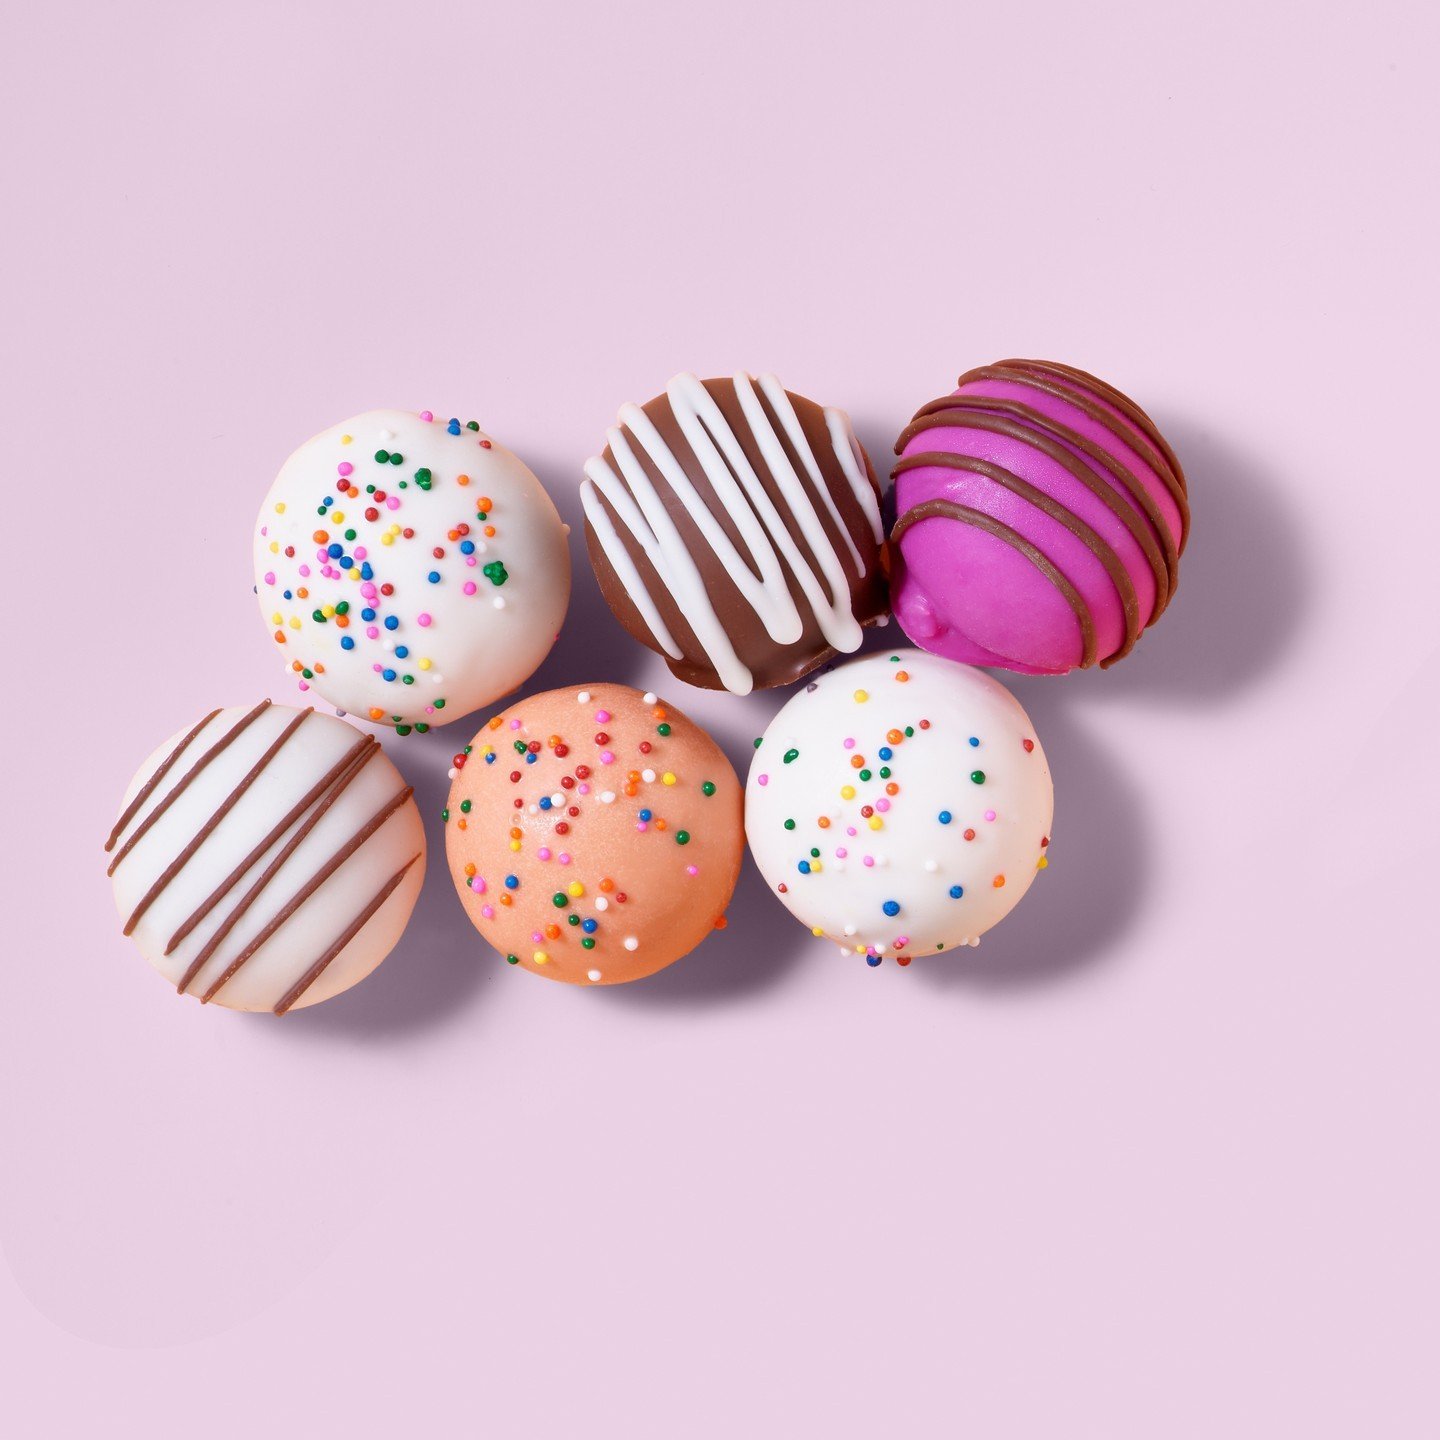 There's a Cake Truffle for every occasion. 🍰✨️